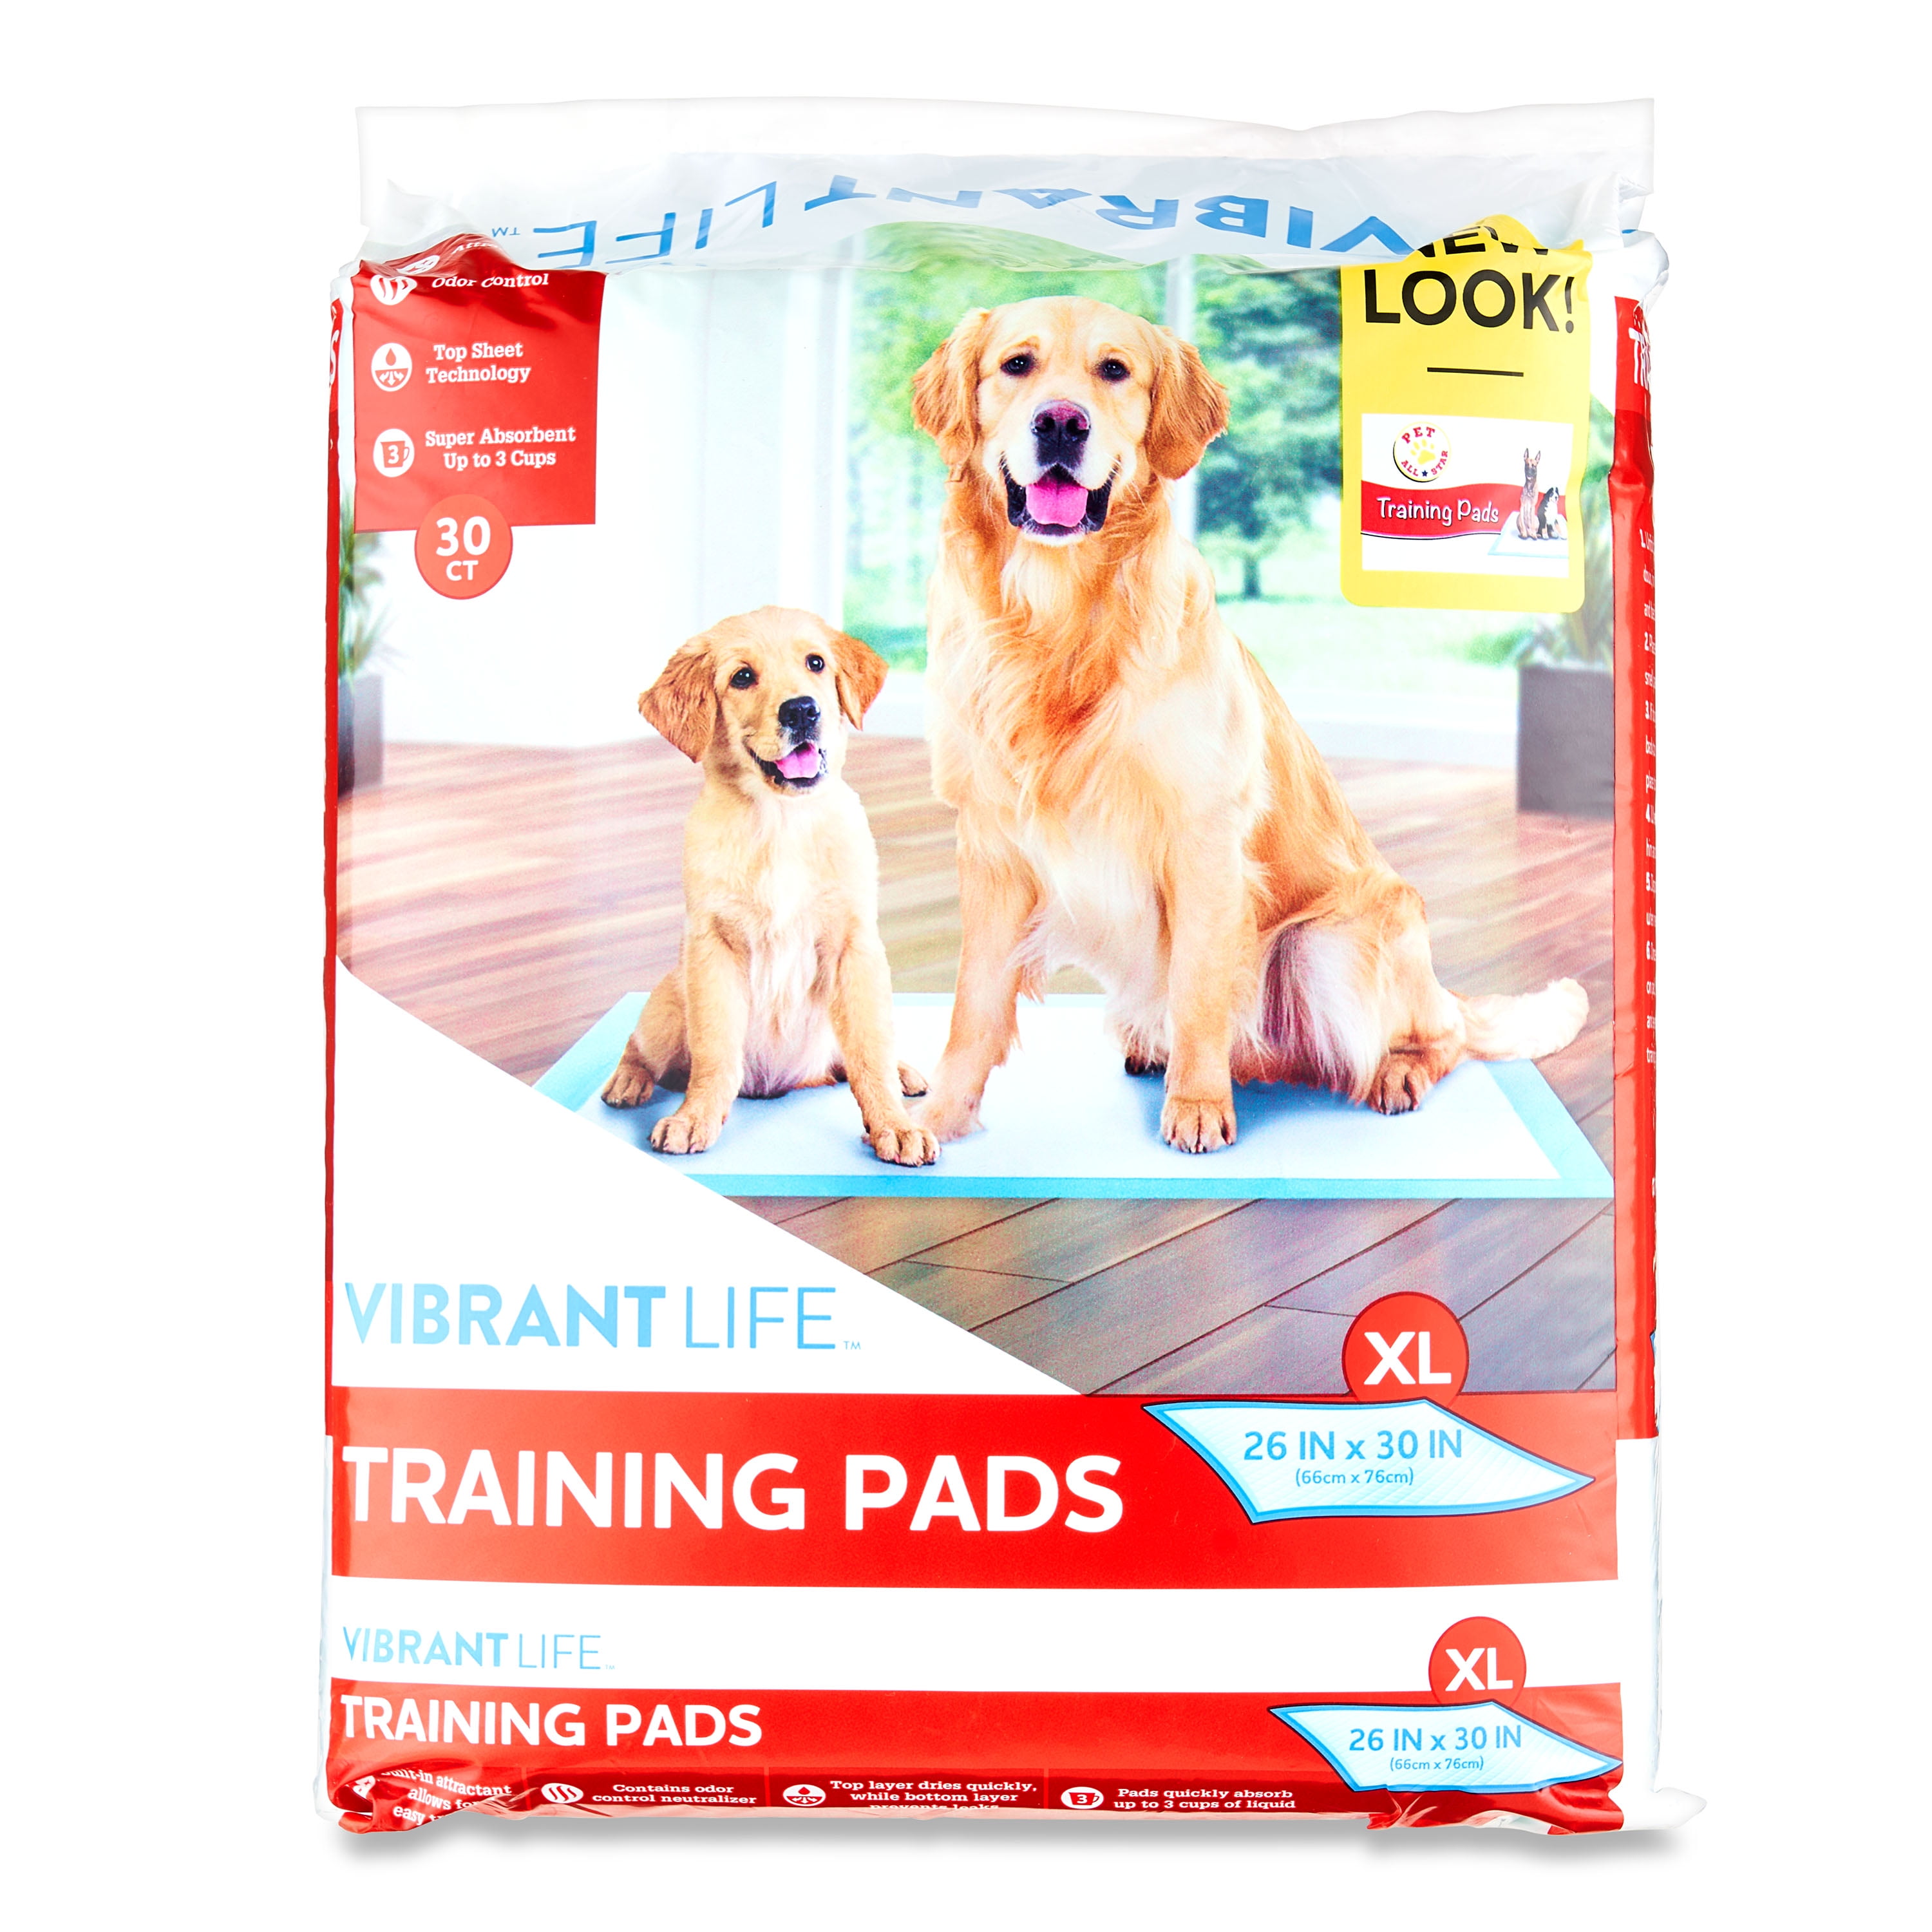 Vibrant Life Training Pads, XL, 26 in x 30 in, 30 Count